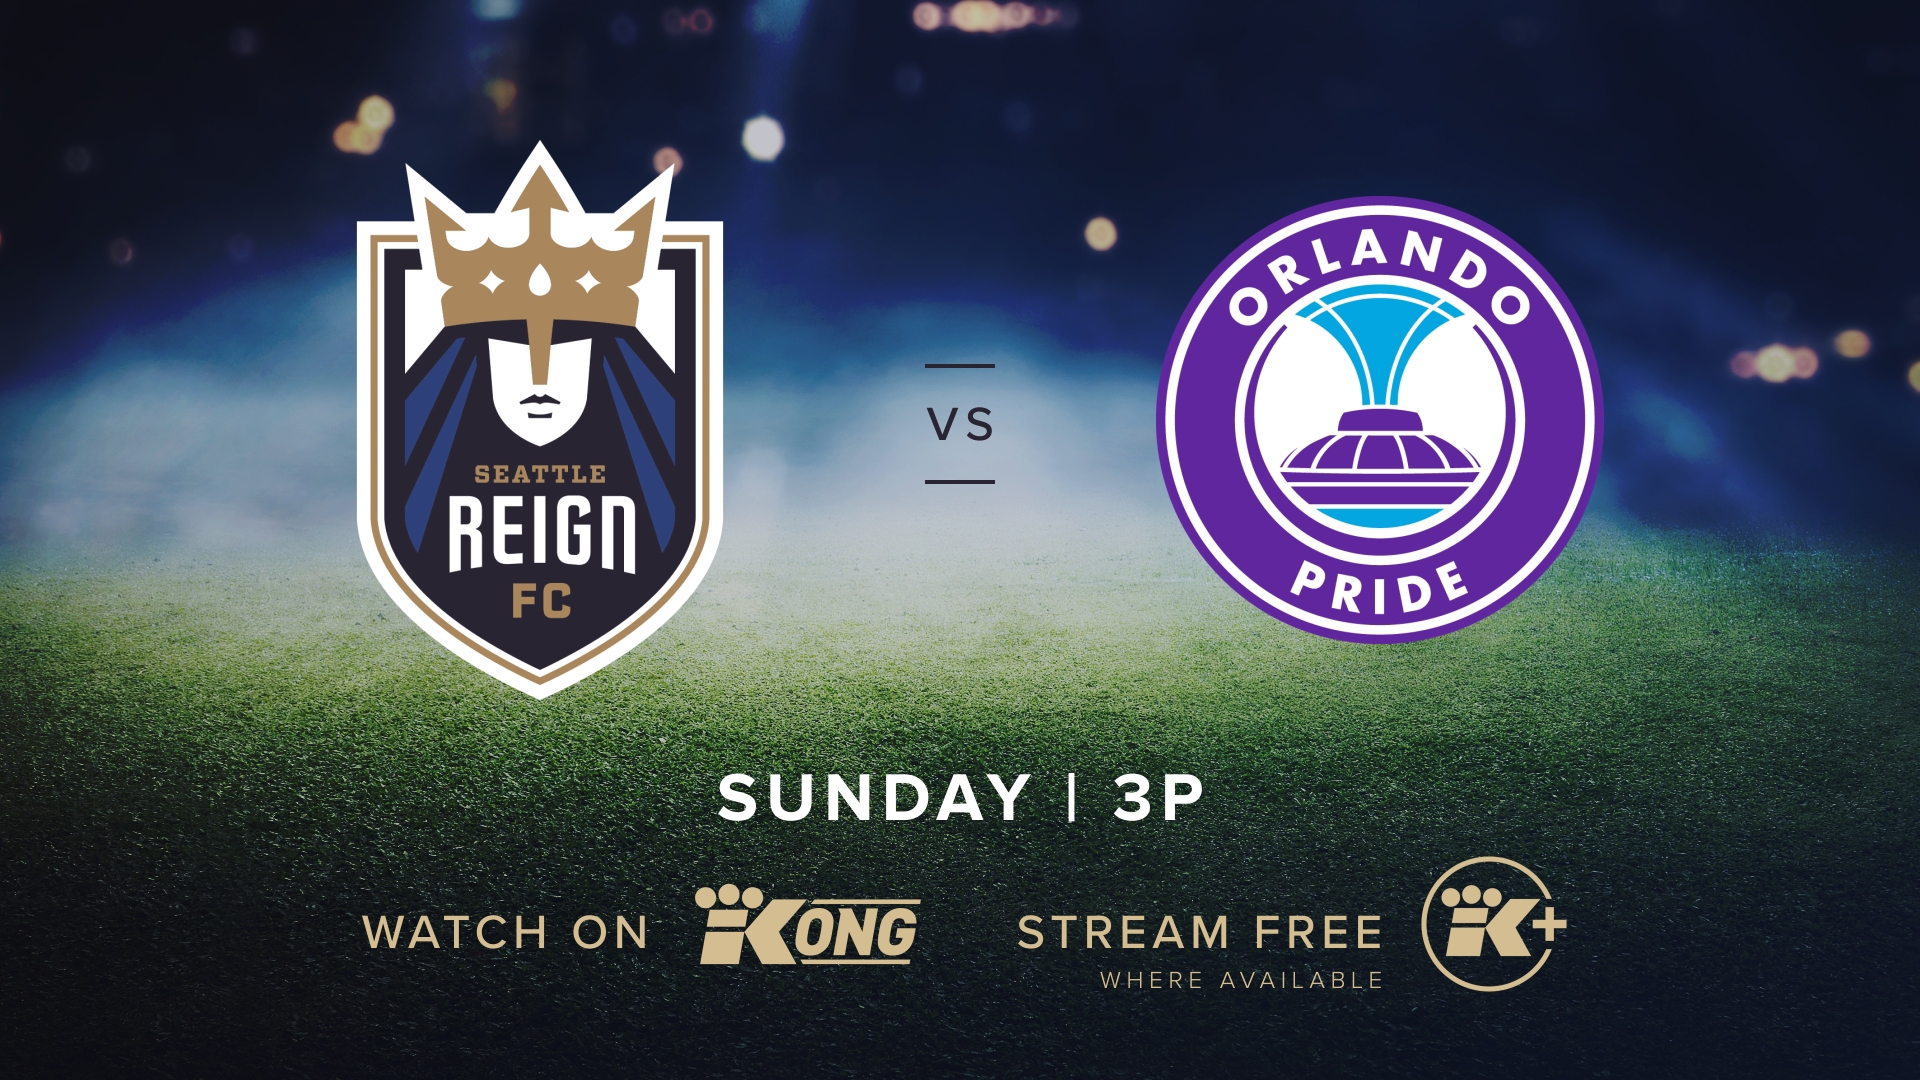 Watch the Seattle Reign FC take on the Orlando Pride at home. Available to stream in the Seattle market.